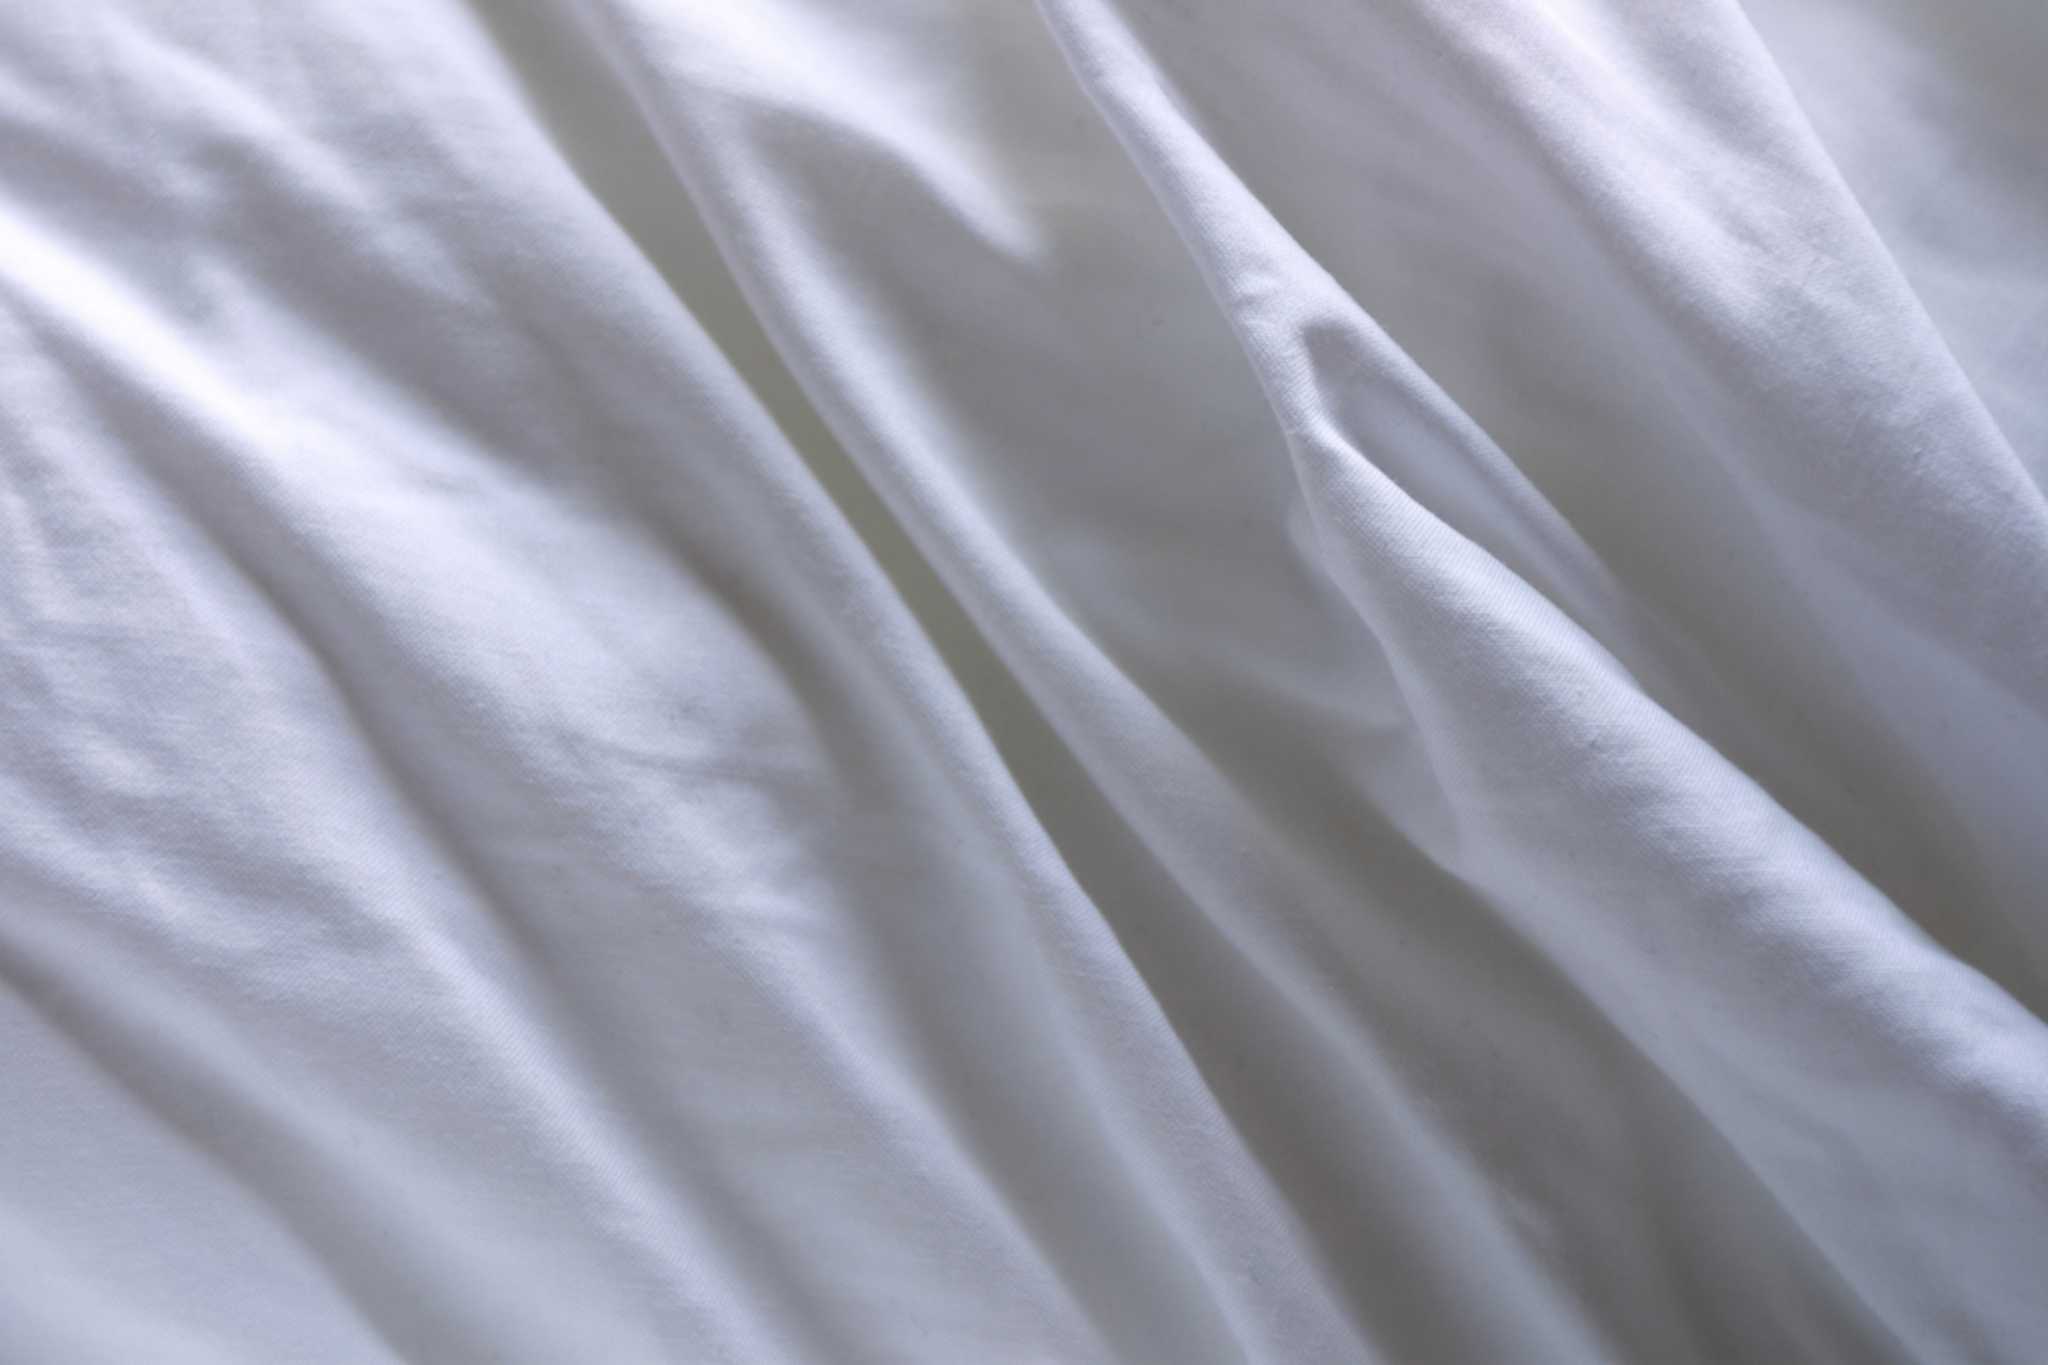 Differences Between Microfiber and Microflannel Sheets